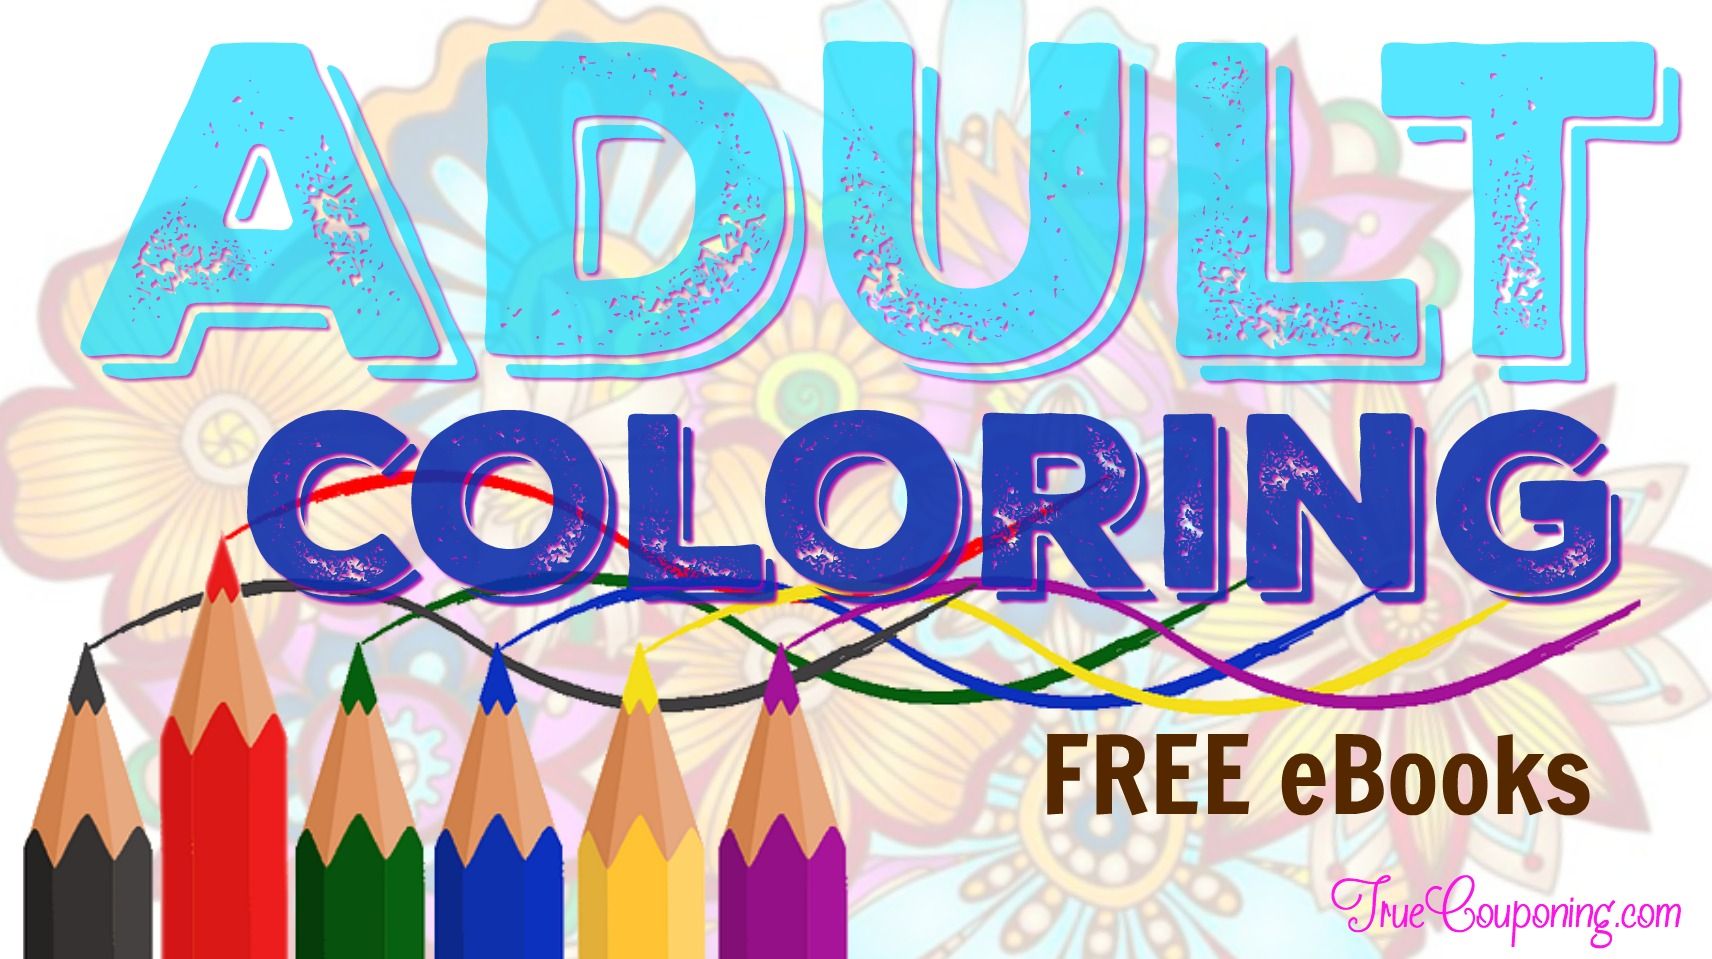 FREE Adult Coloring Books